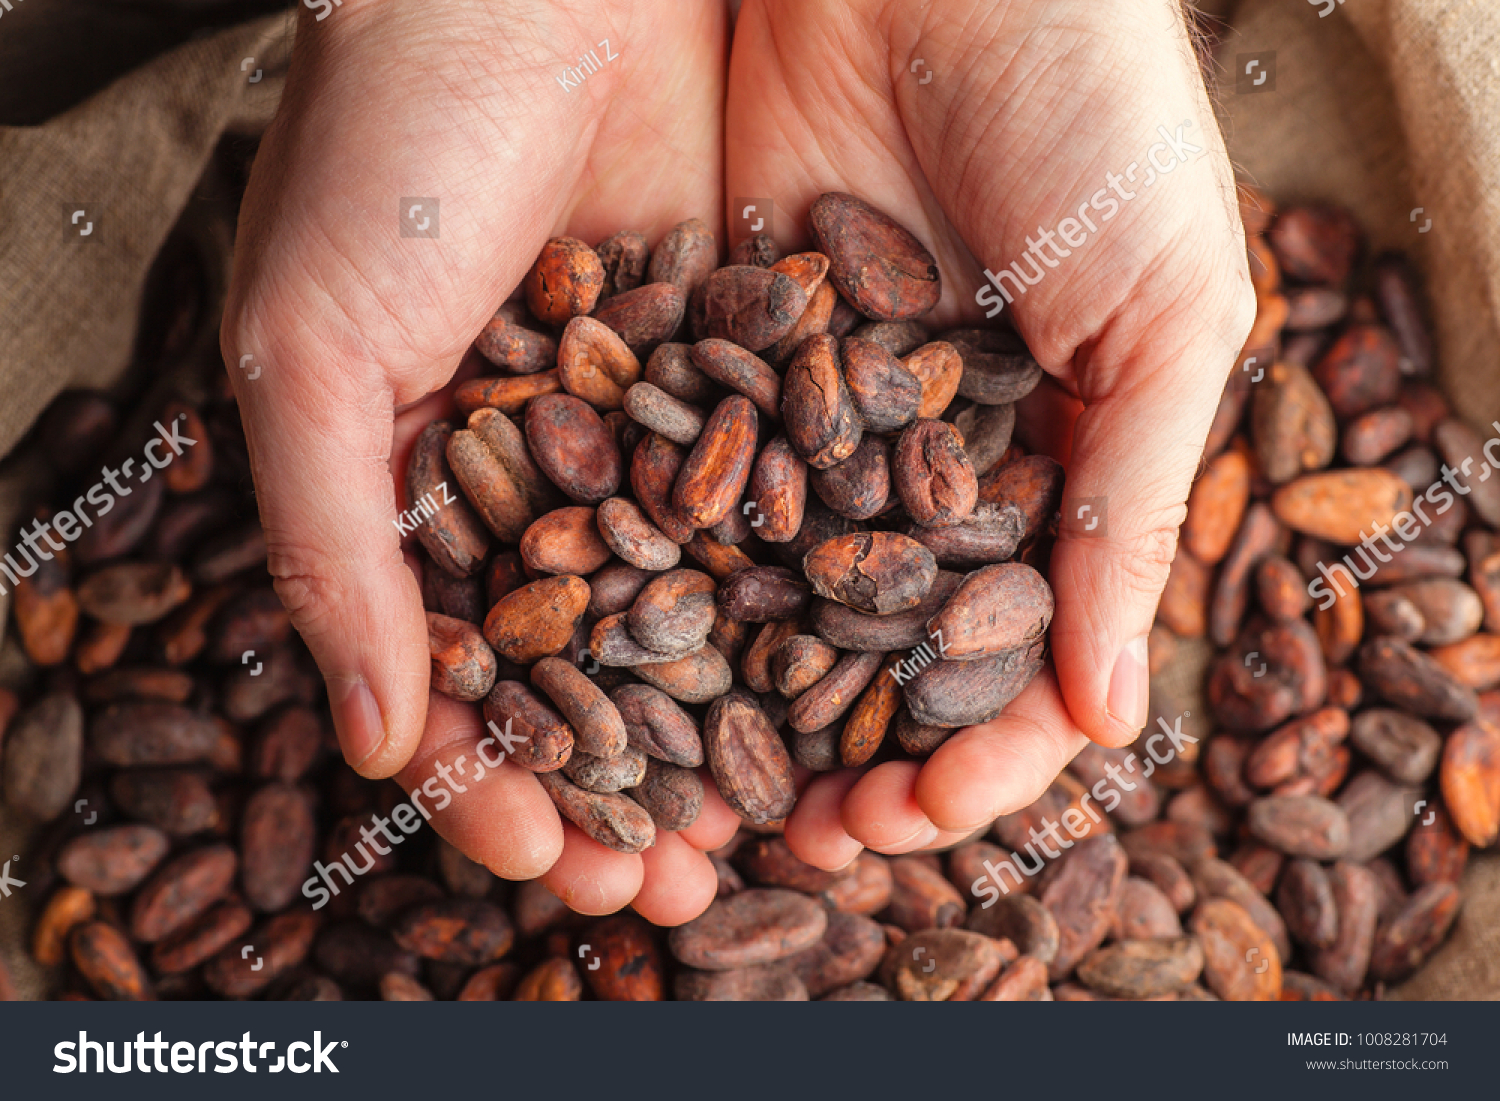 Hands holding freshly harvested raw cocoa beans over a bag with cocoa beans #1008281704